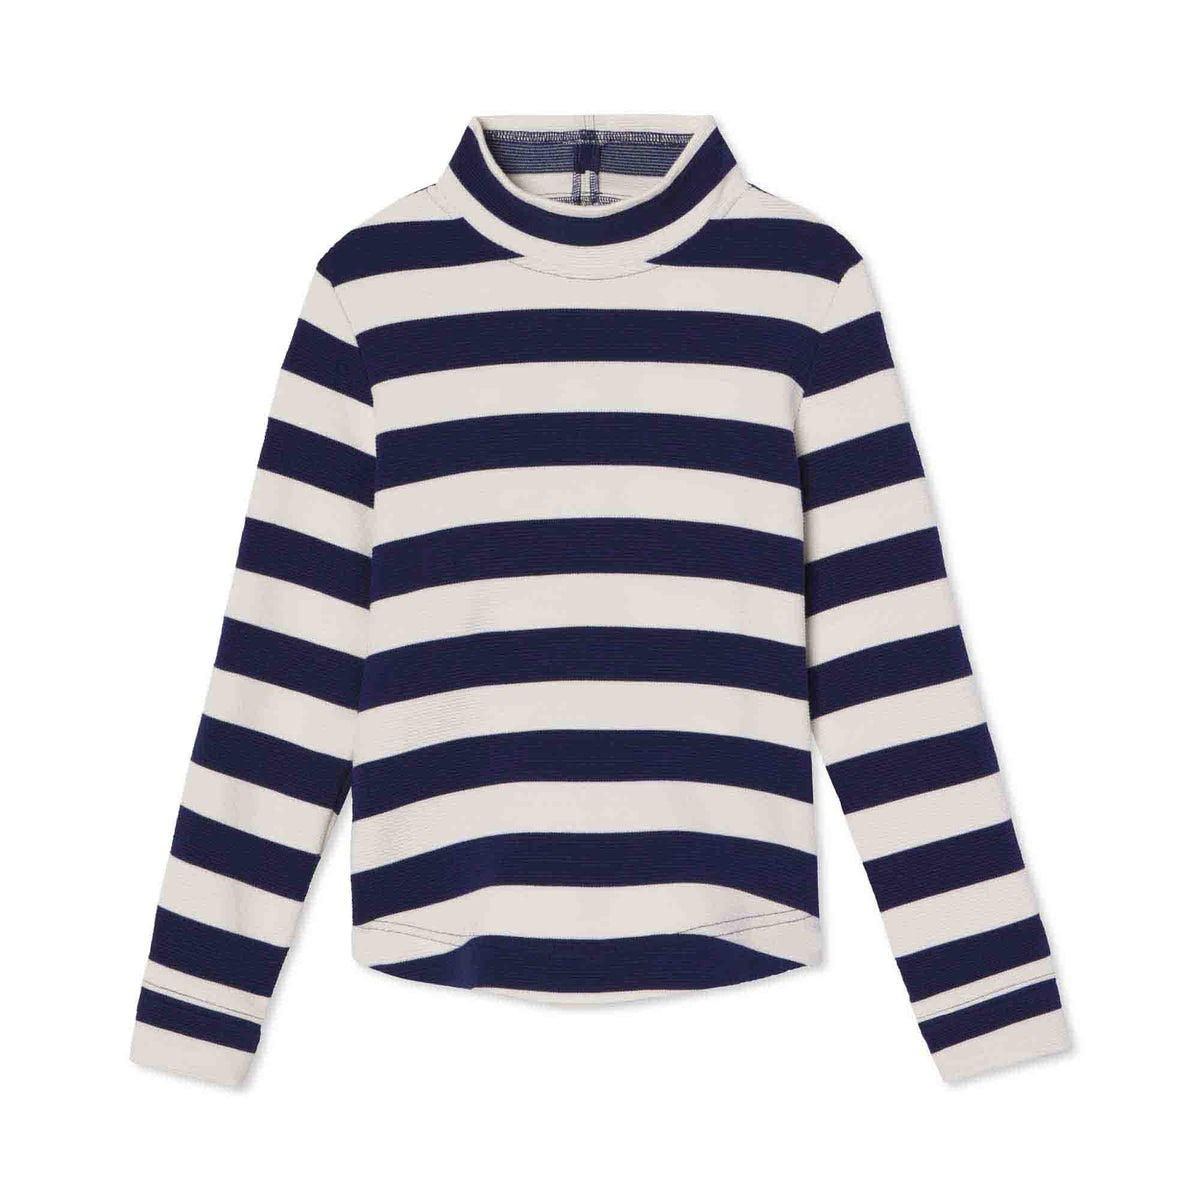 Classic and Preppy Wren Ottoman Pullover, Tahoe Stripe-Shirts and Tops-Tahoe Stripe-XS (2-3T)-CPC - Classic Prep Childrenswear